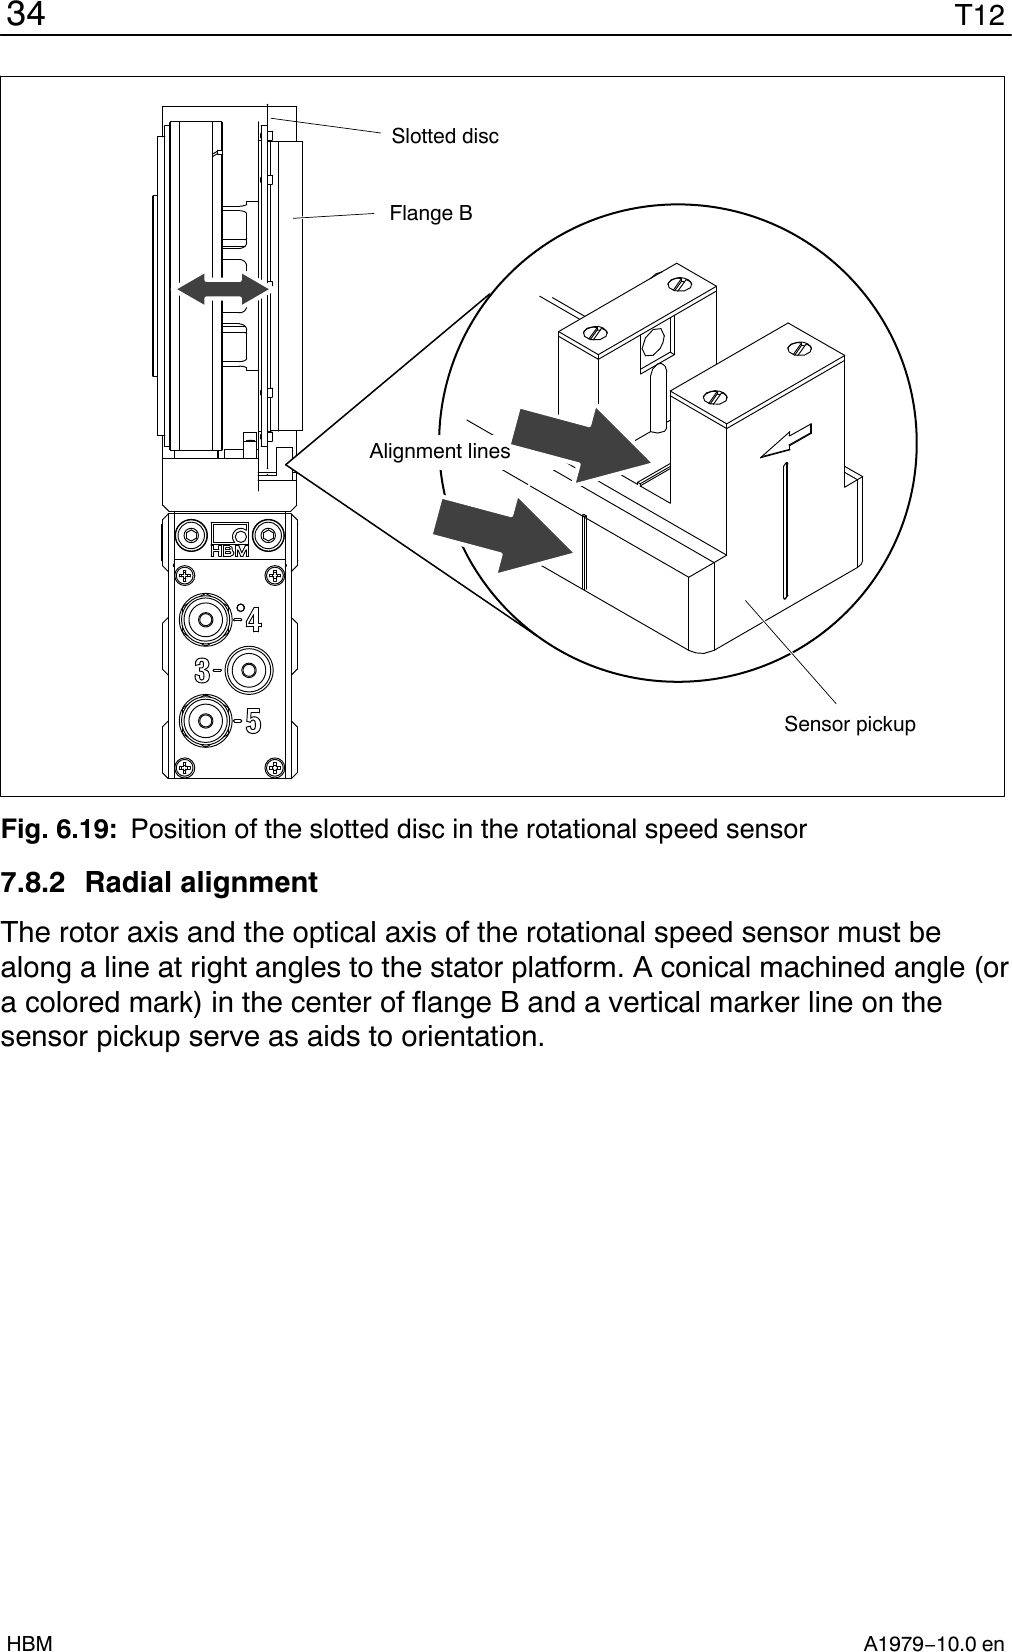 T1234A1979−10.0 enHBMAlignment linesSlotted discSensor pickupFlange BFig. 6.19: Position of the slotted disc in the rotational speed sensor7.8.2 Radial alignmentThe rotor axis and the optical axis of the rotational speed sensor must bealong a line at right angles to the stator platform. A conical machined angle (ora colored mark) in the center of flange B and a vertical marker line on thesensor pickup serve as aids to orientation.